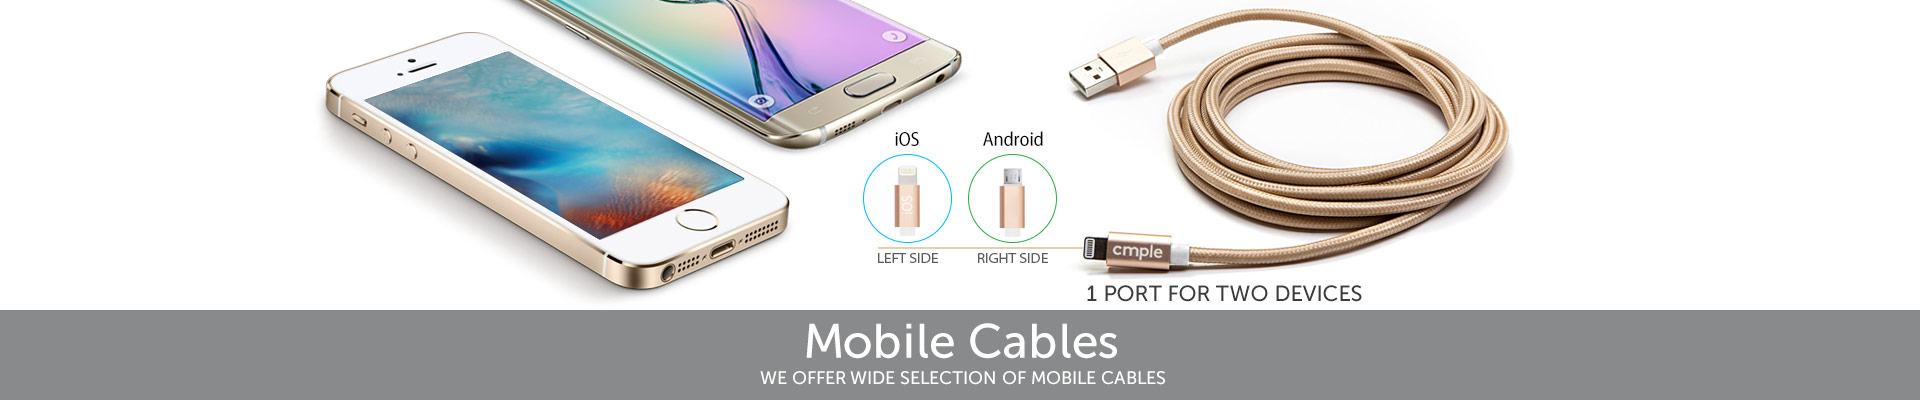 cmple mobile cables